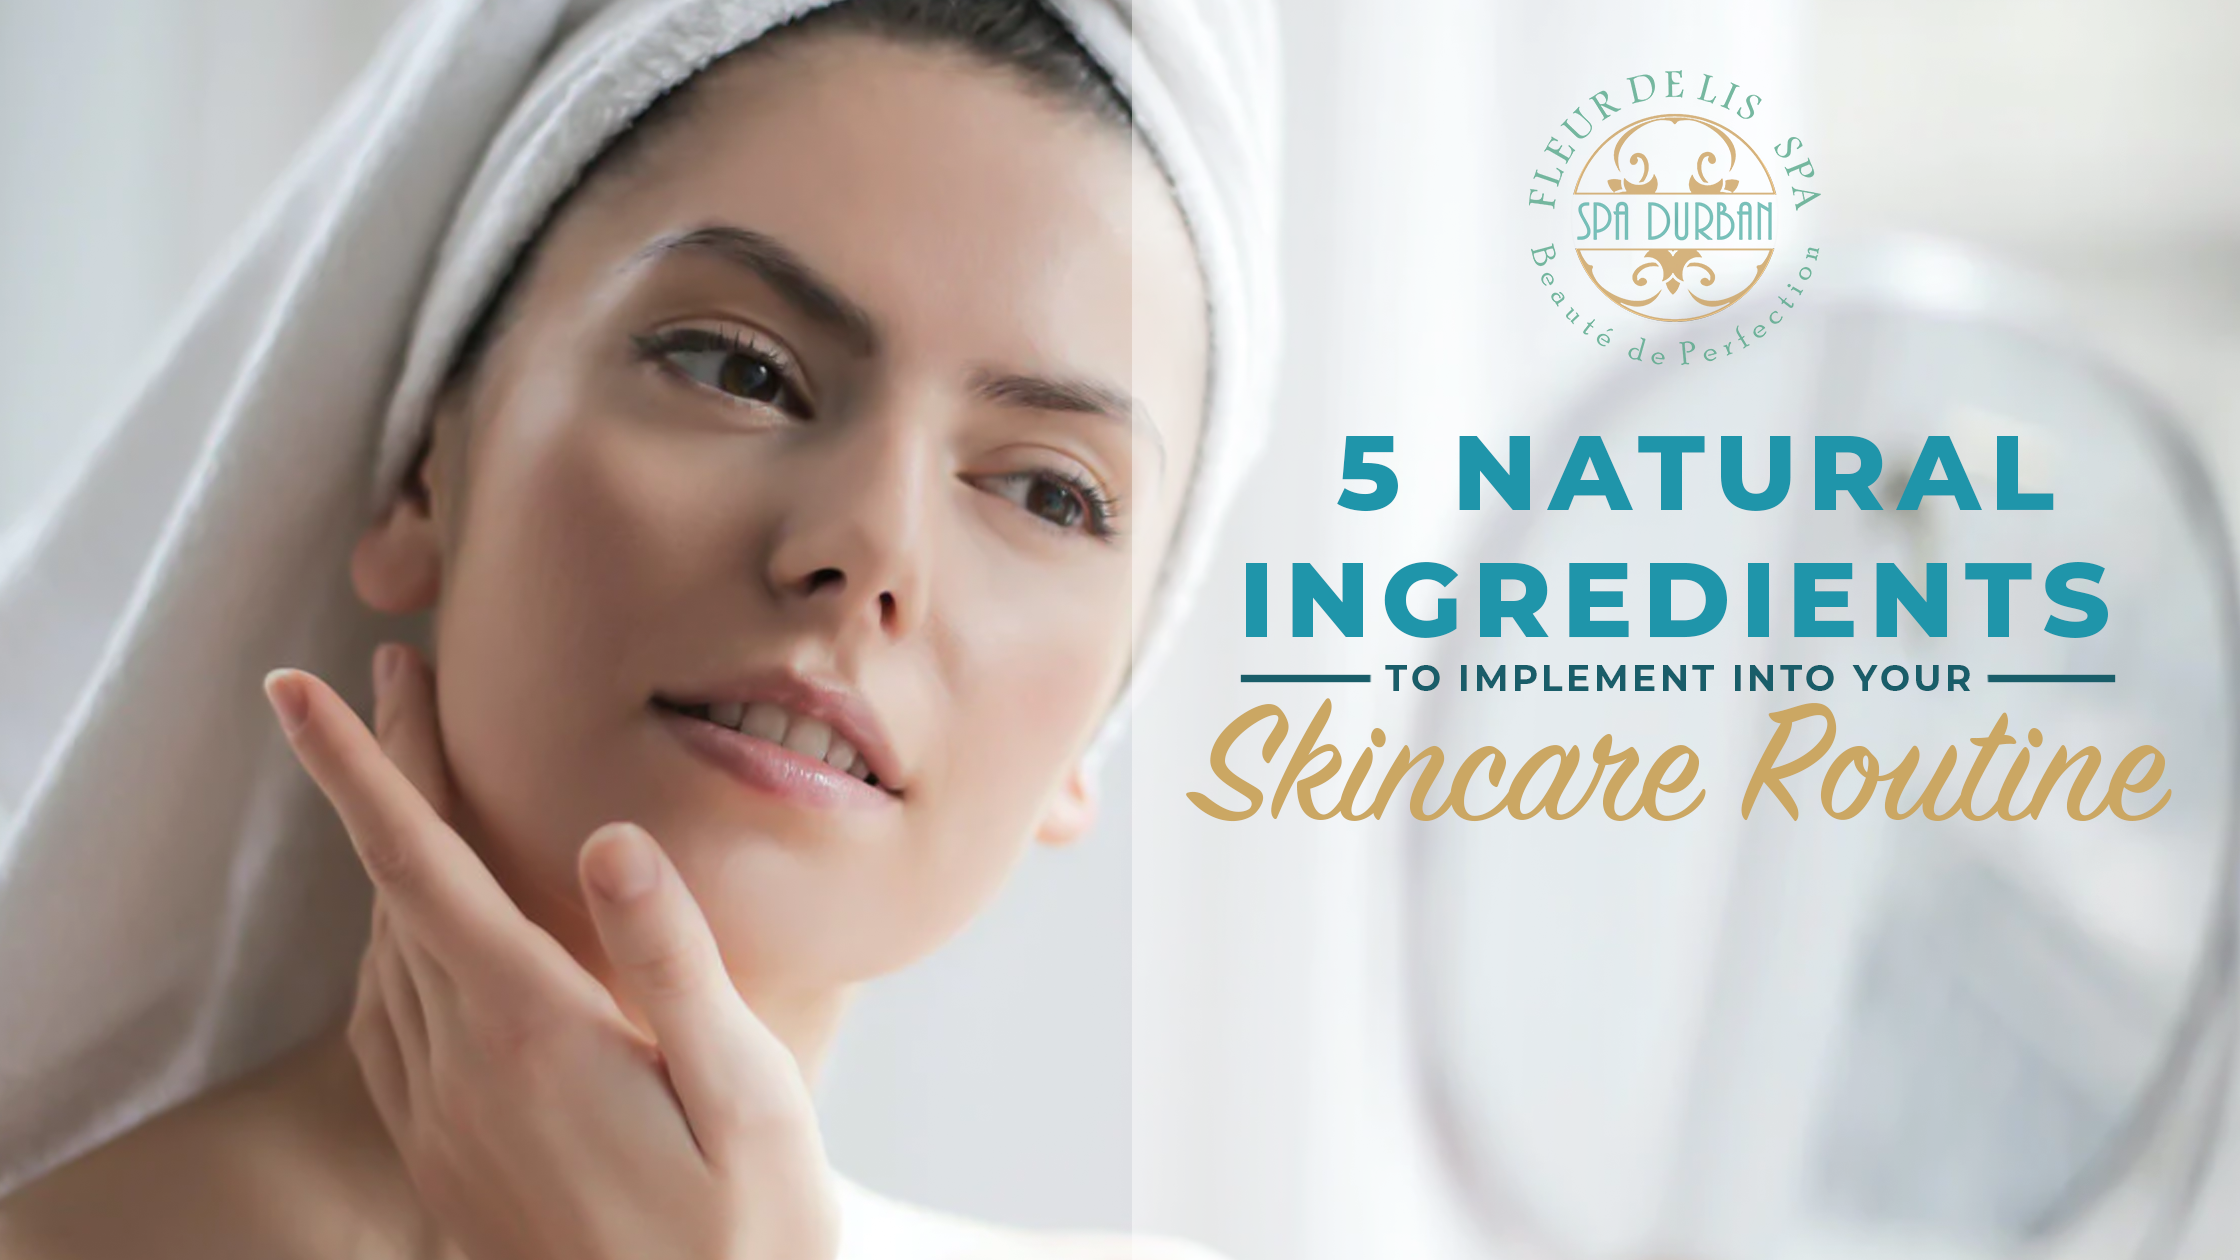 5 Natural Ingredients To Implement Into Your Skincare Routine